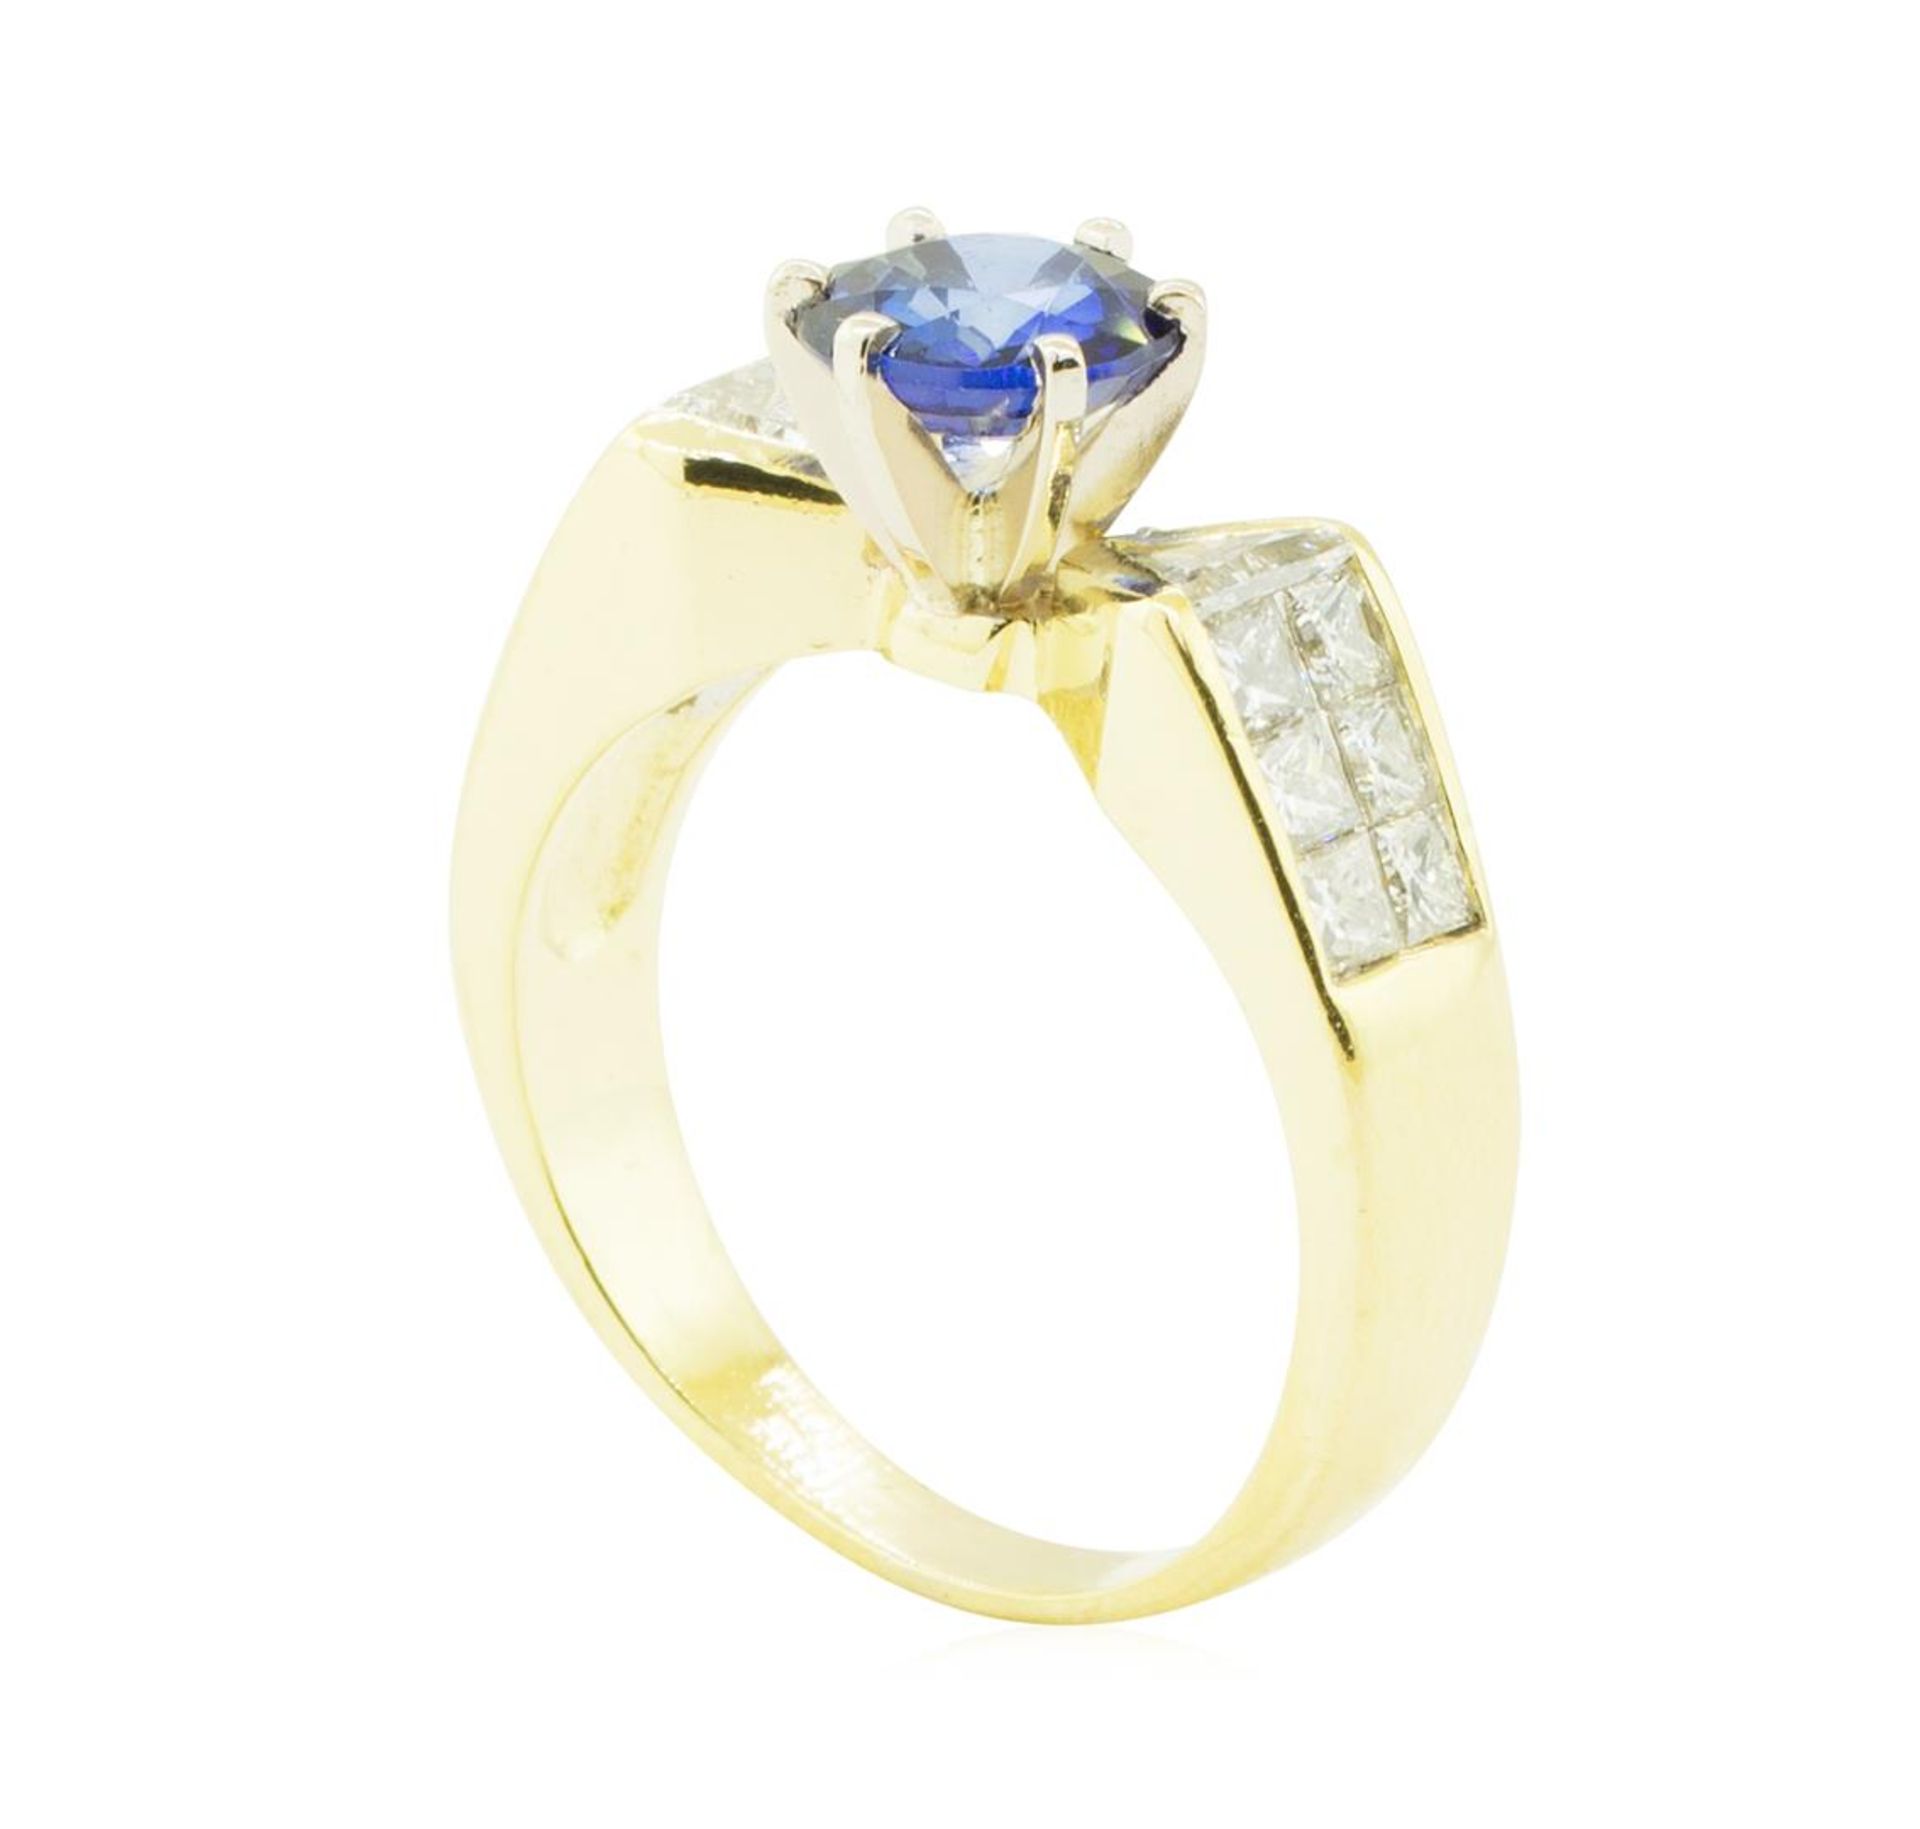 2.20 ctw Blue Sapphire and Diamond Ring - 18KT Yellow Gold - Image 4 of 4